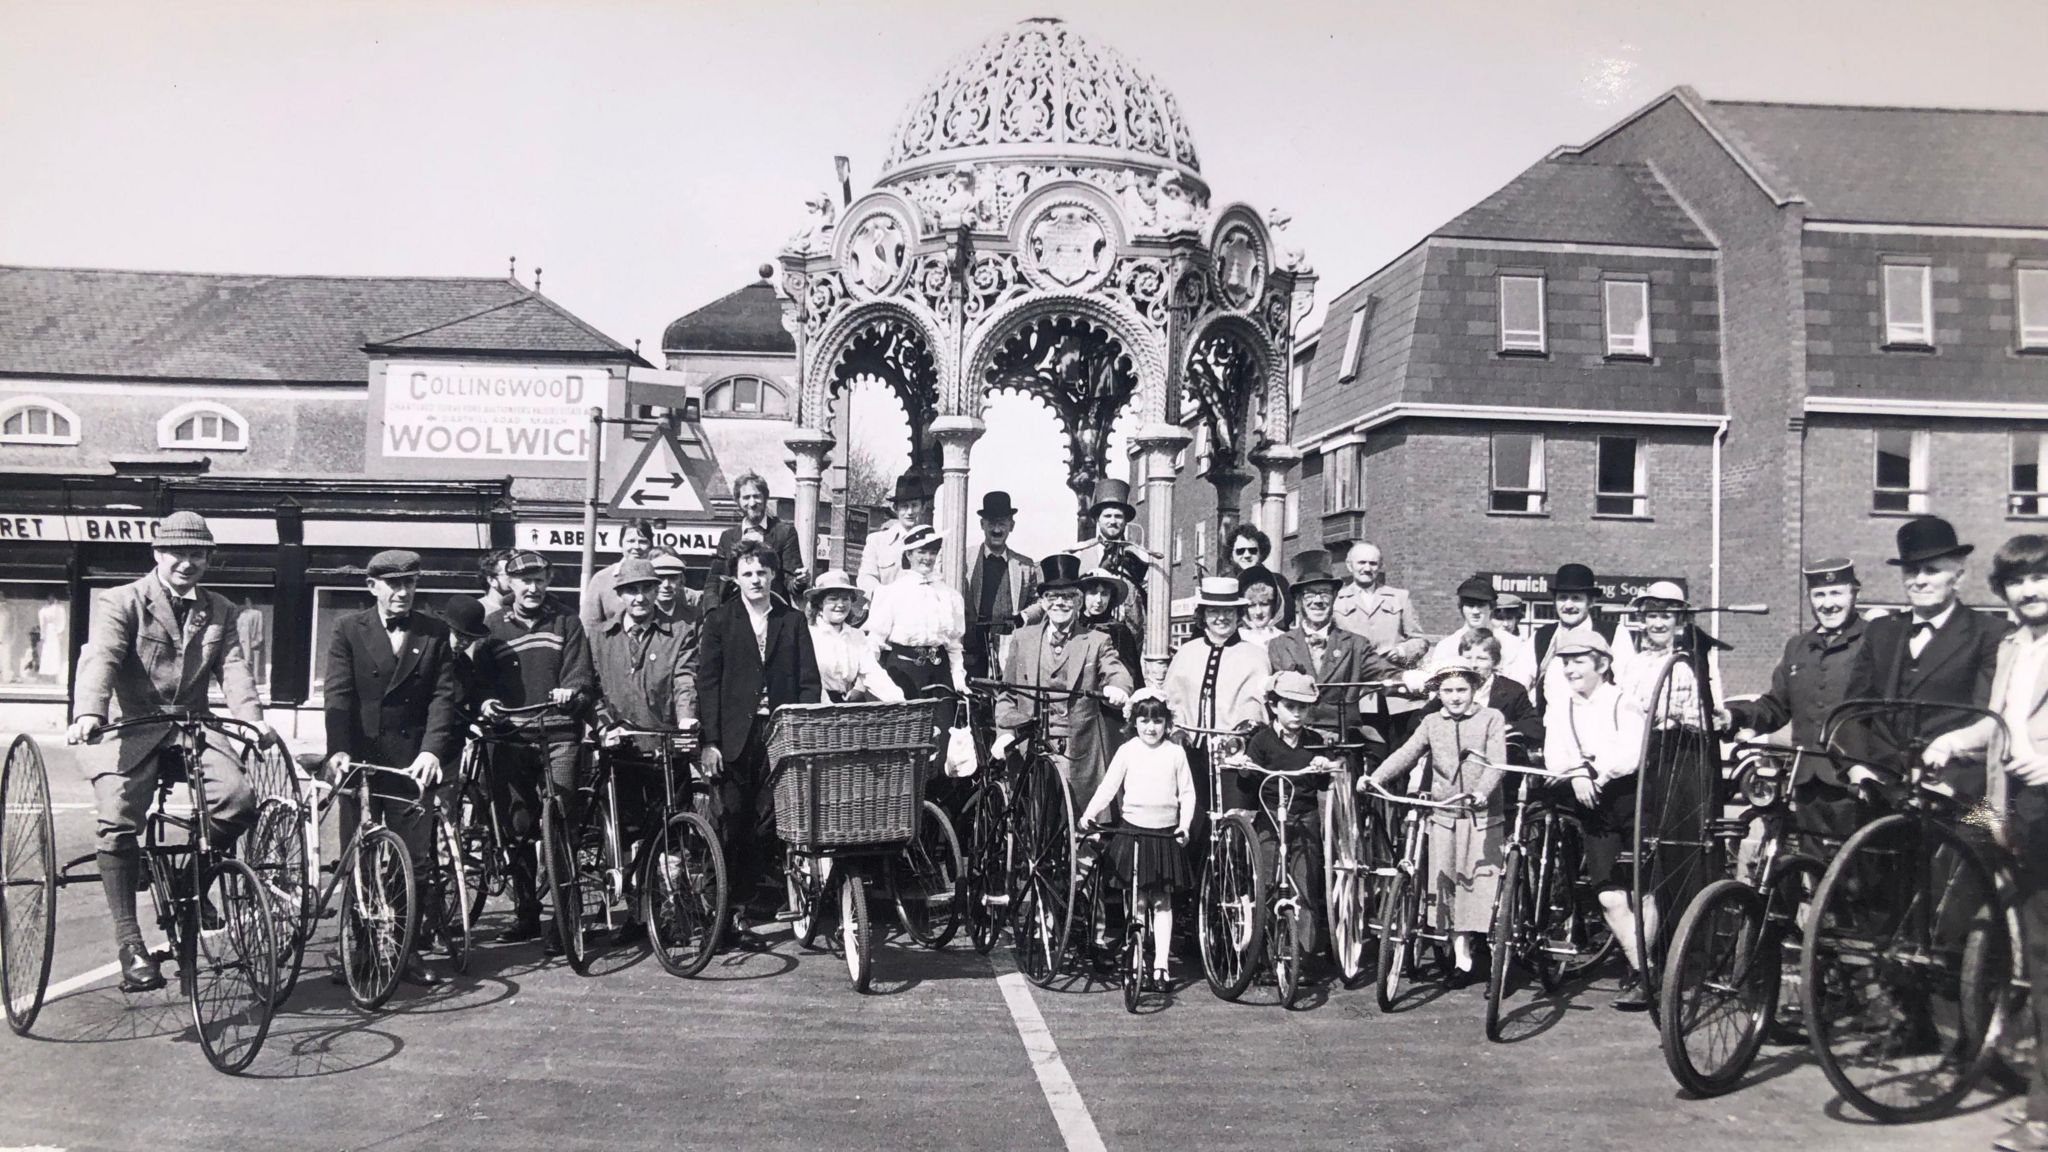 A black and white image of a row of people on vintage bikes dressed in vintage costumes